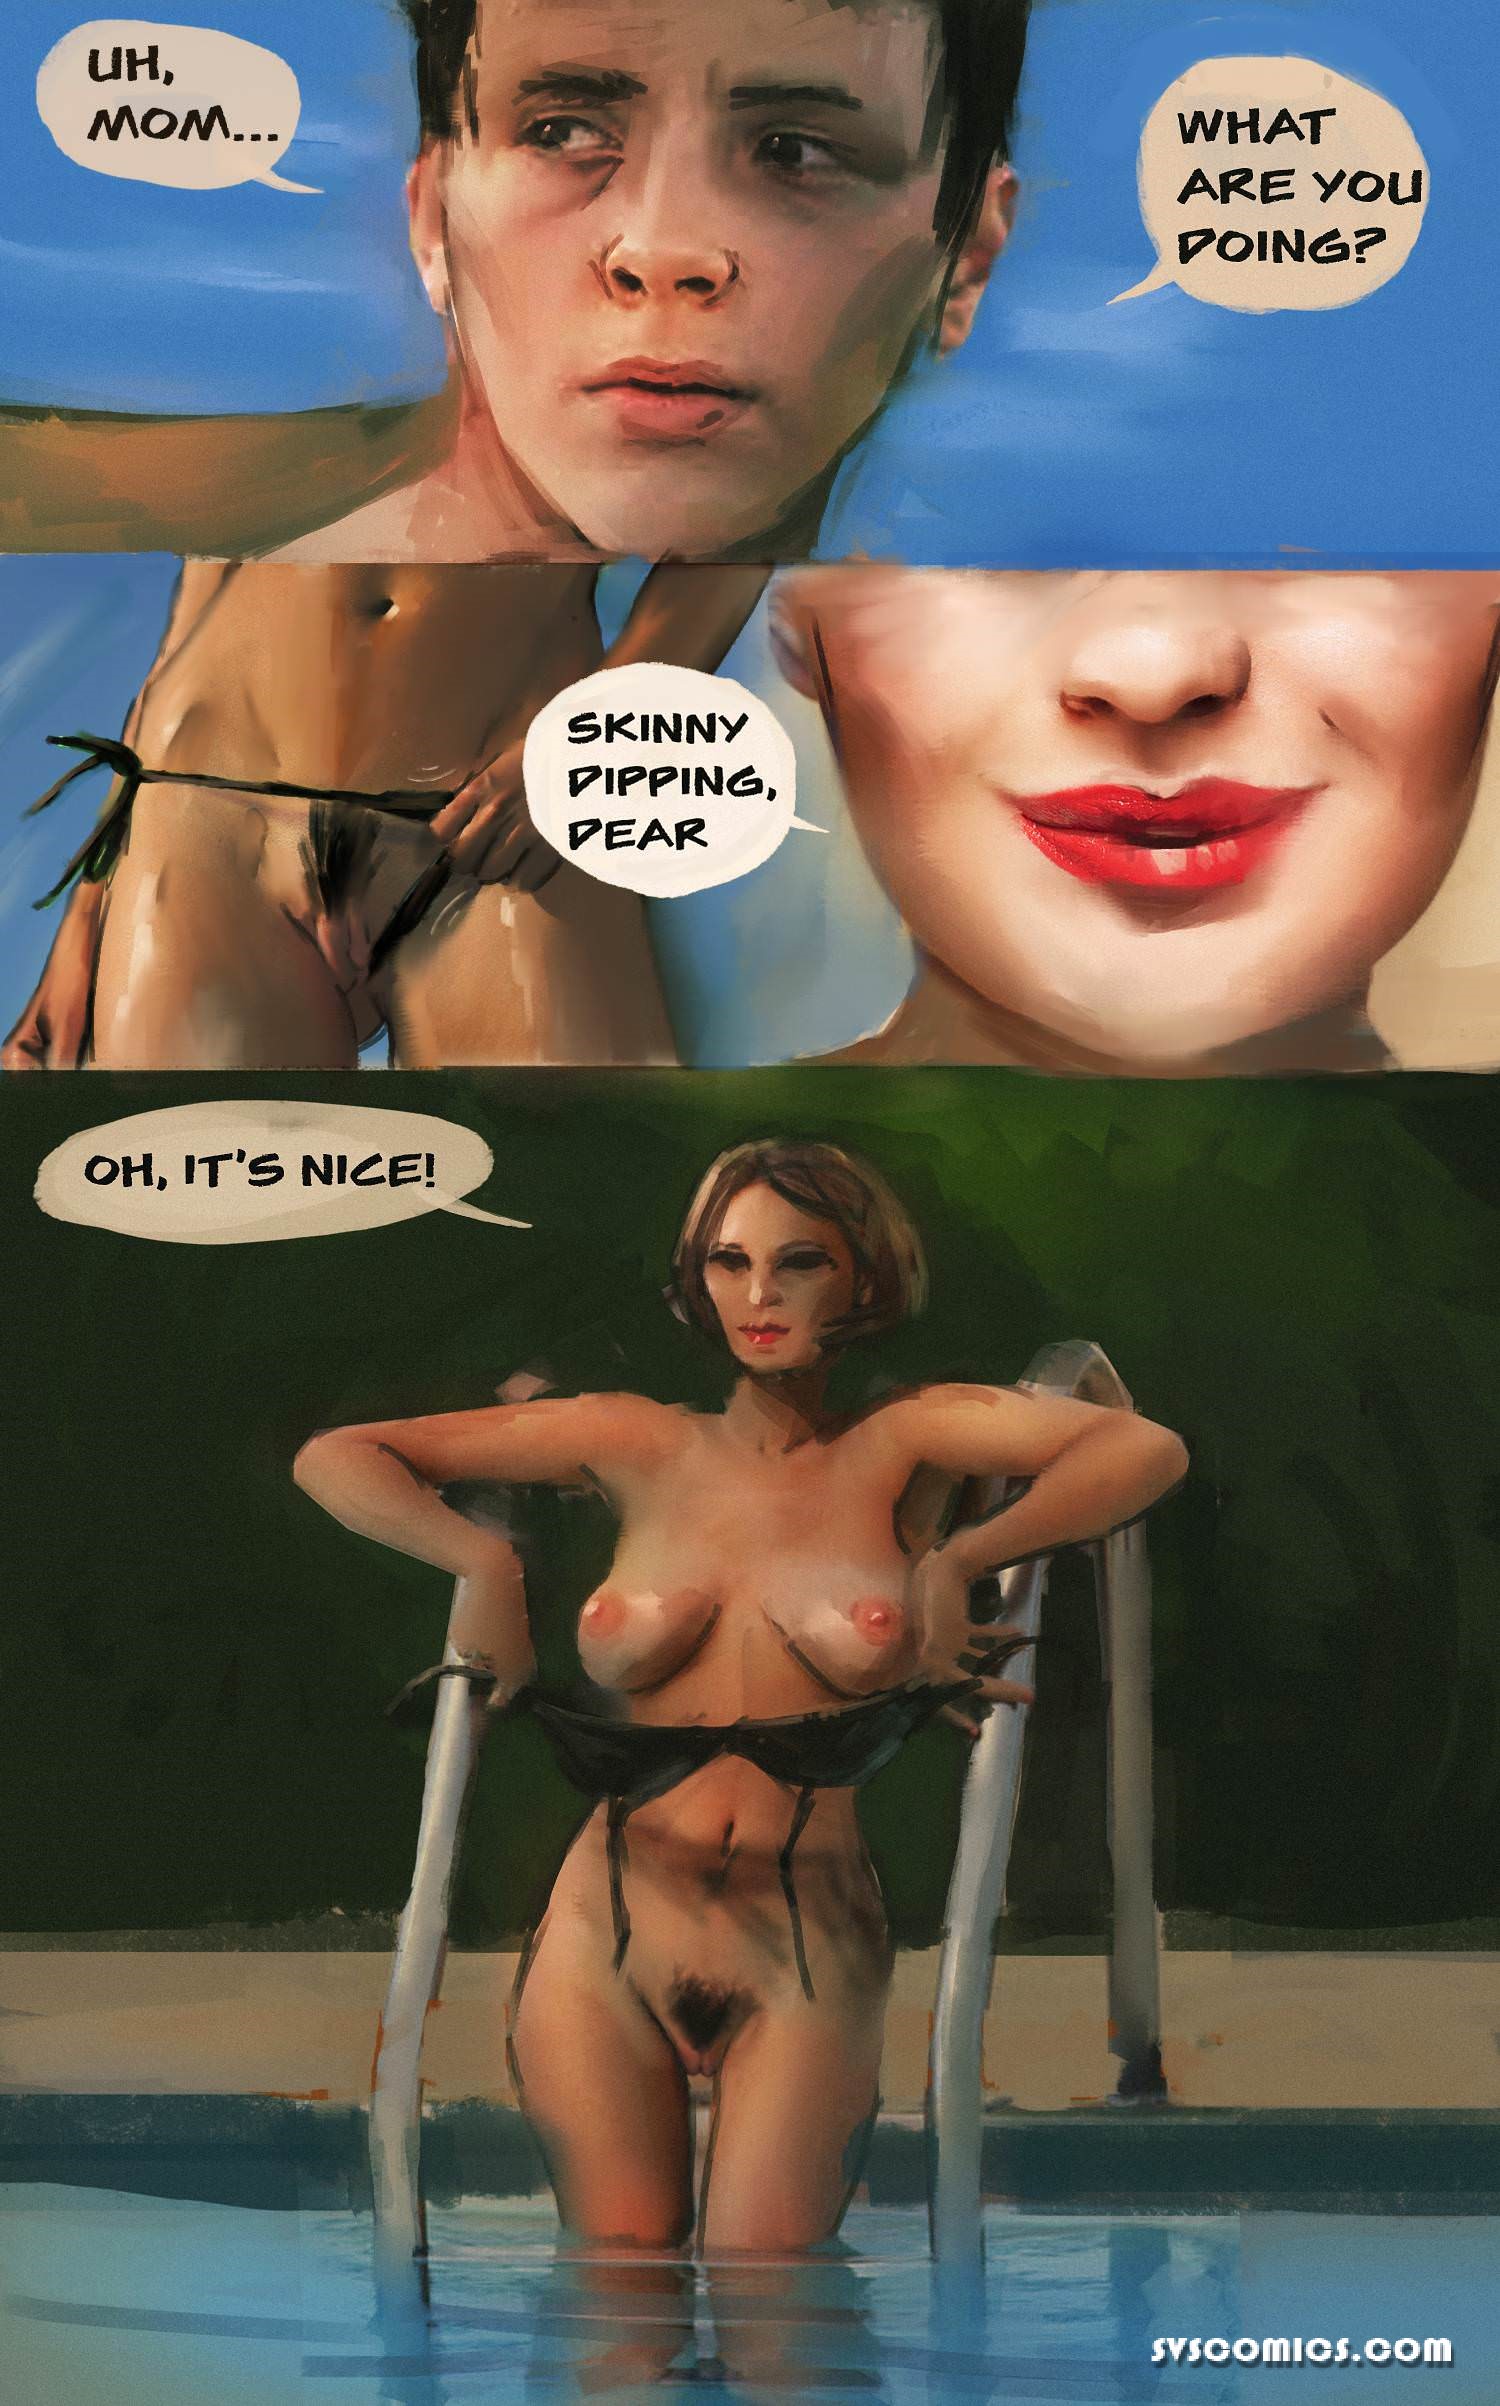 LostPhynotype5 - Hot Summer Day With Mom | Porn Comics